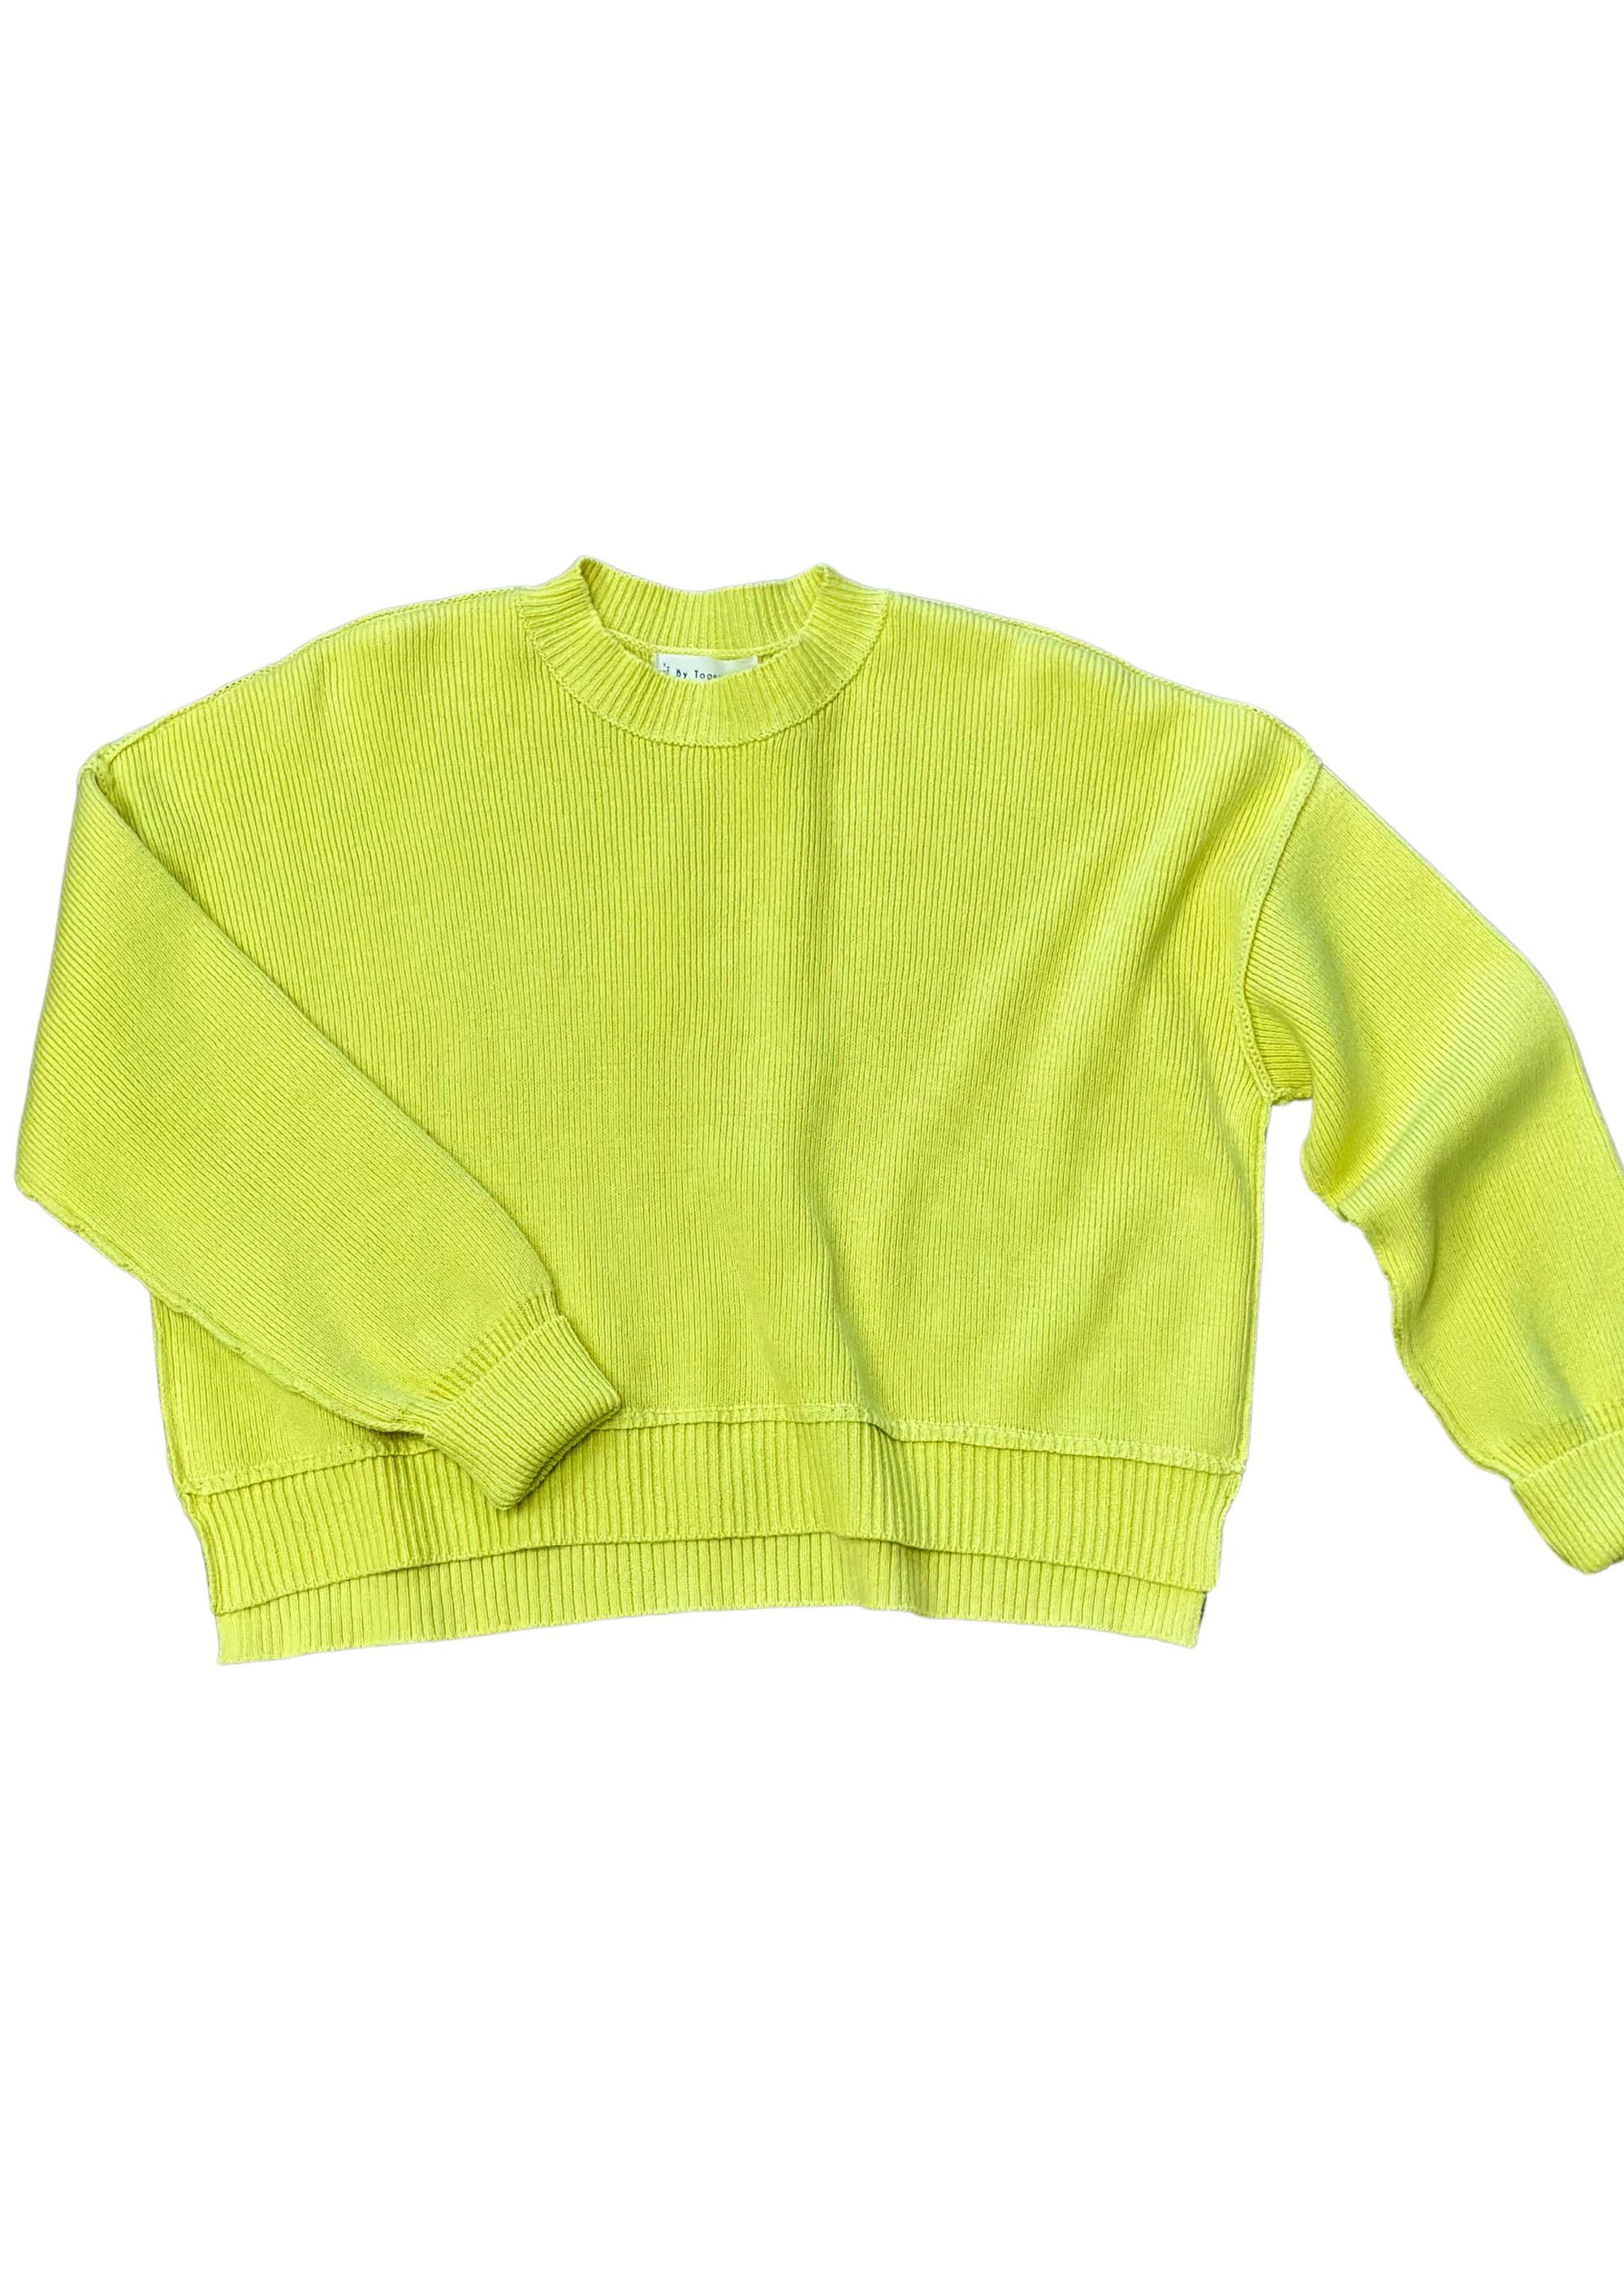 Spring has Sprung Knit Sweater